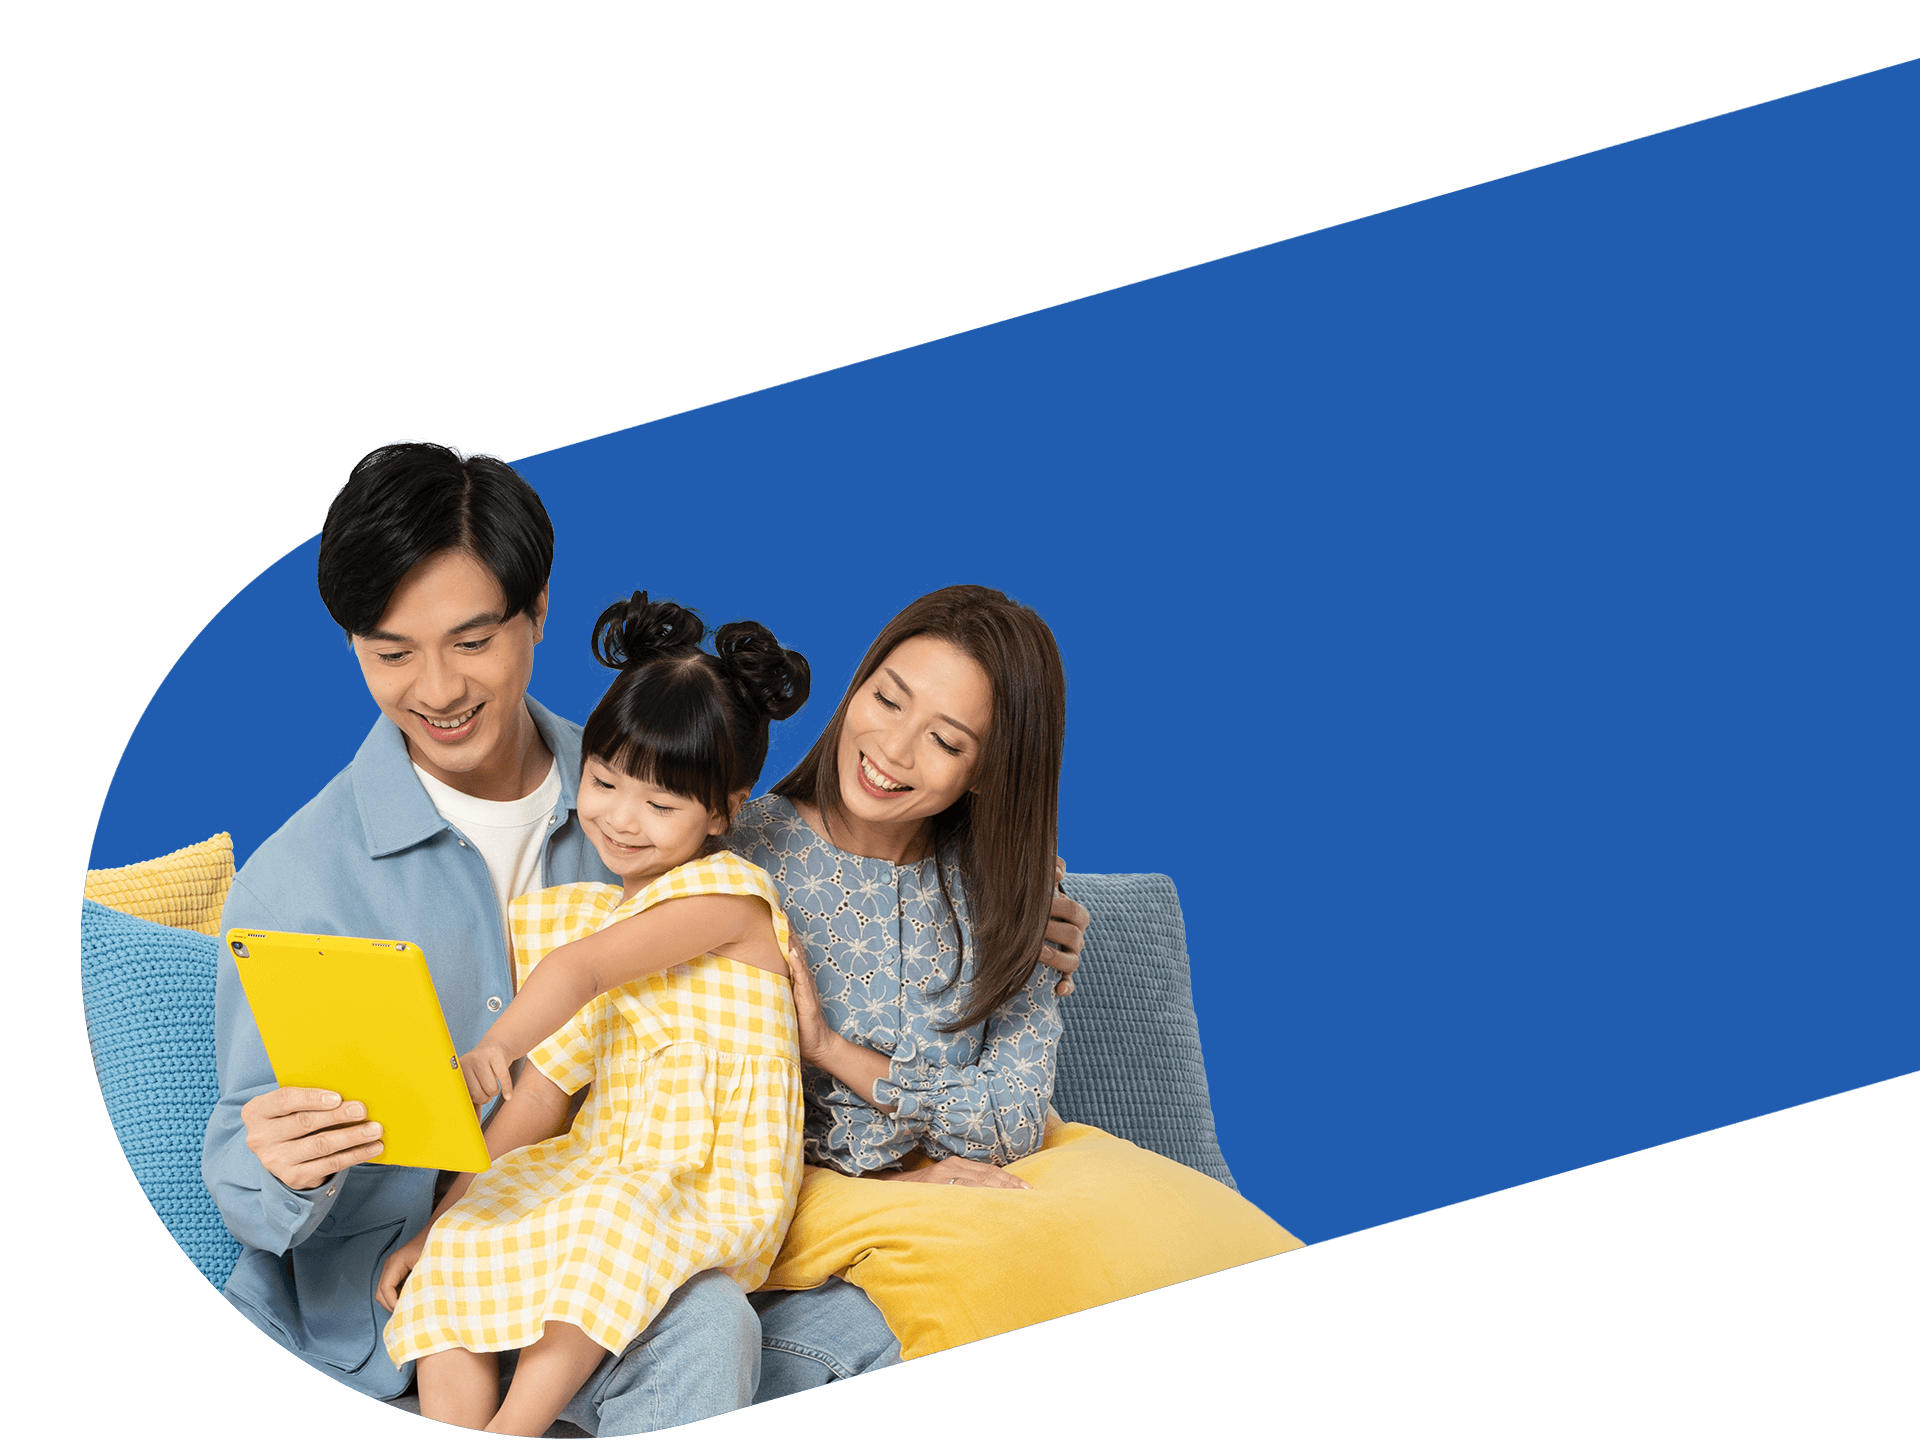 Get everyday protection for you and your family with yuu Insure